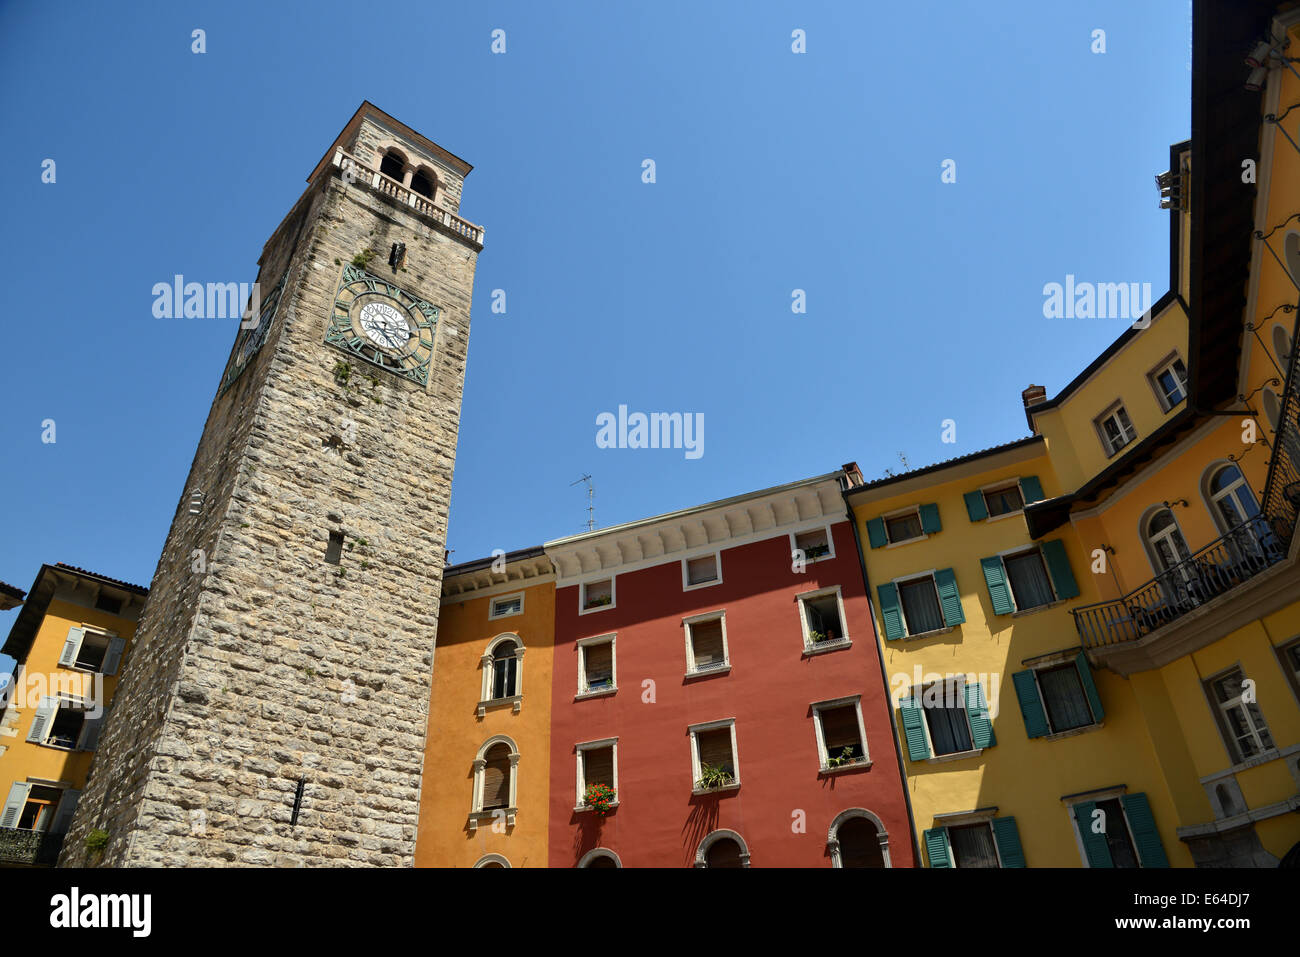 The Torre Apponale, 13th Century clock tower on Piazza III Novembre in Riva Del Garda at the waters edge of Lake Garda, Italy Stock Photo